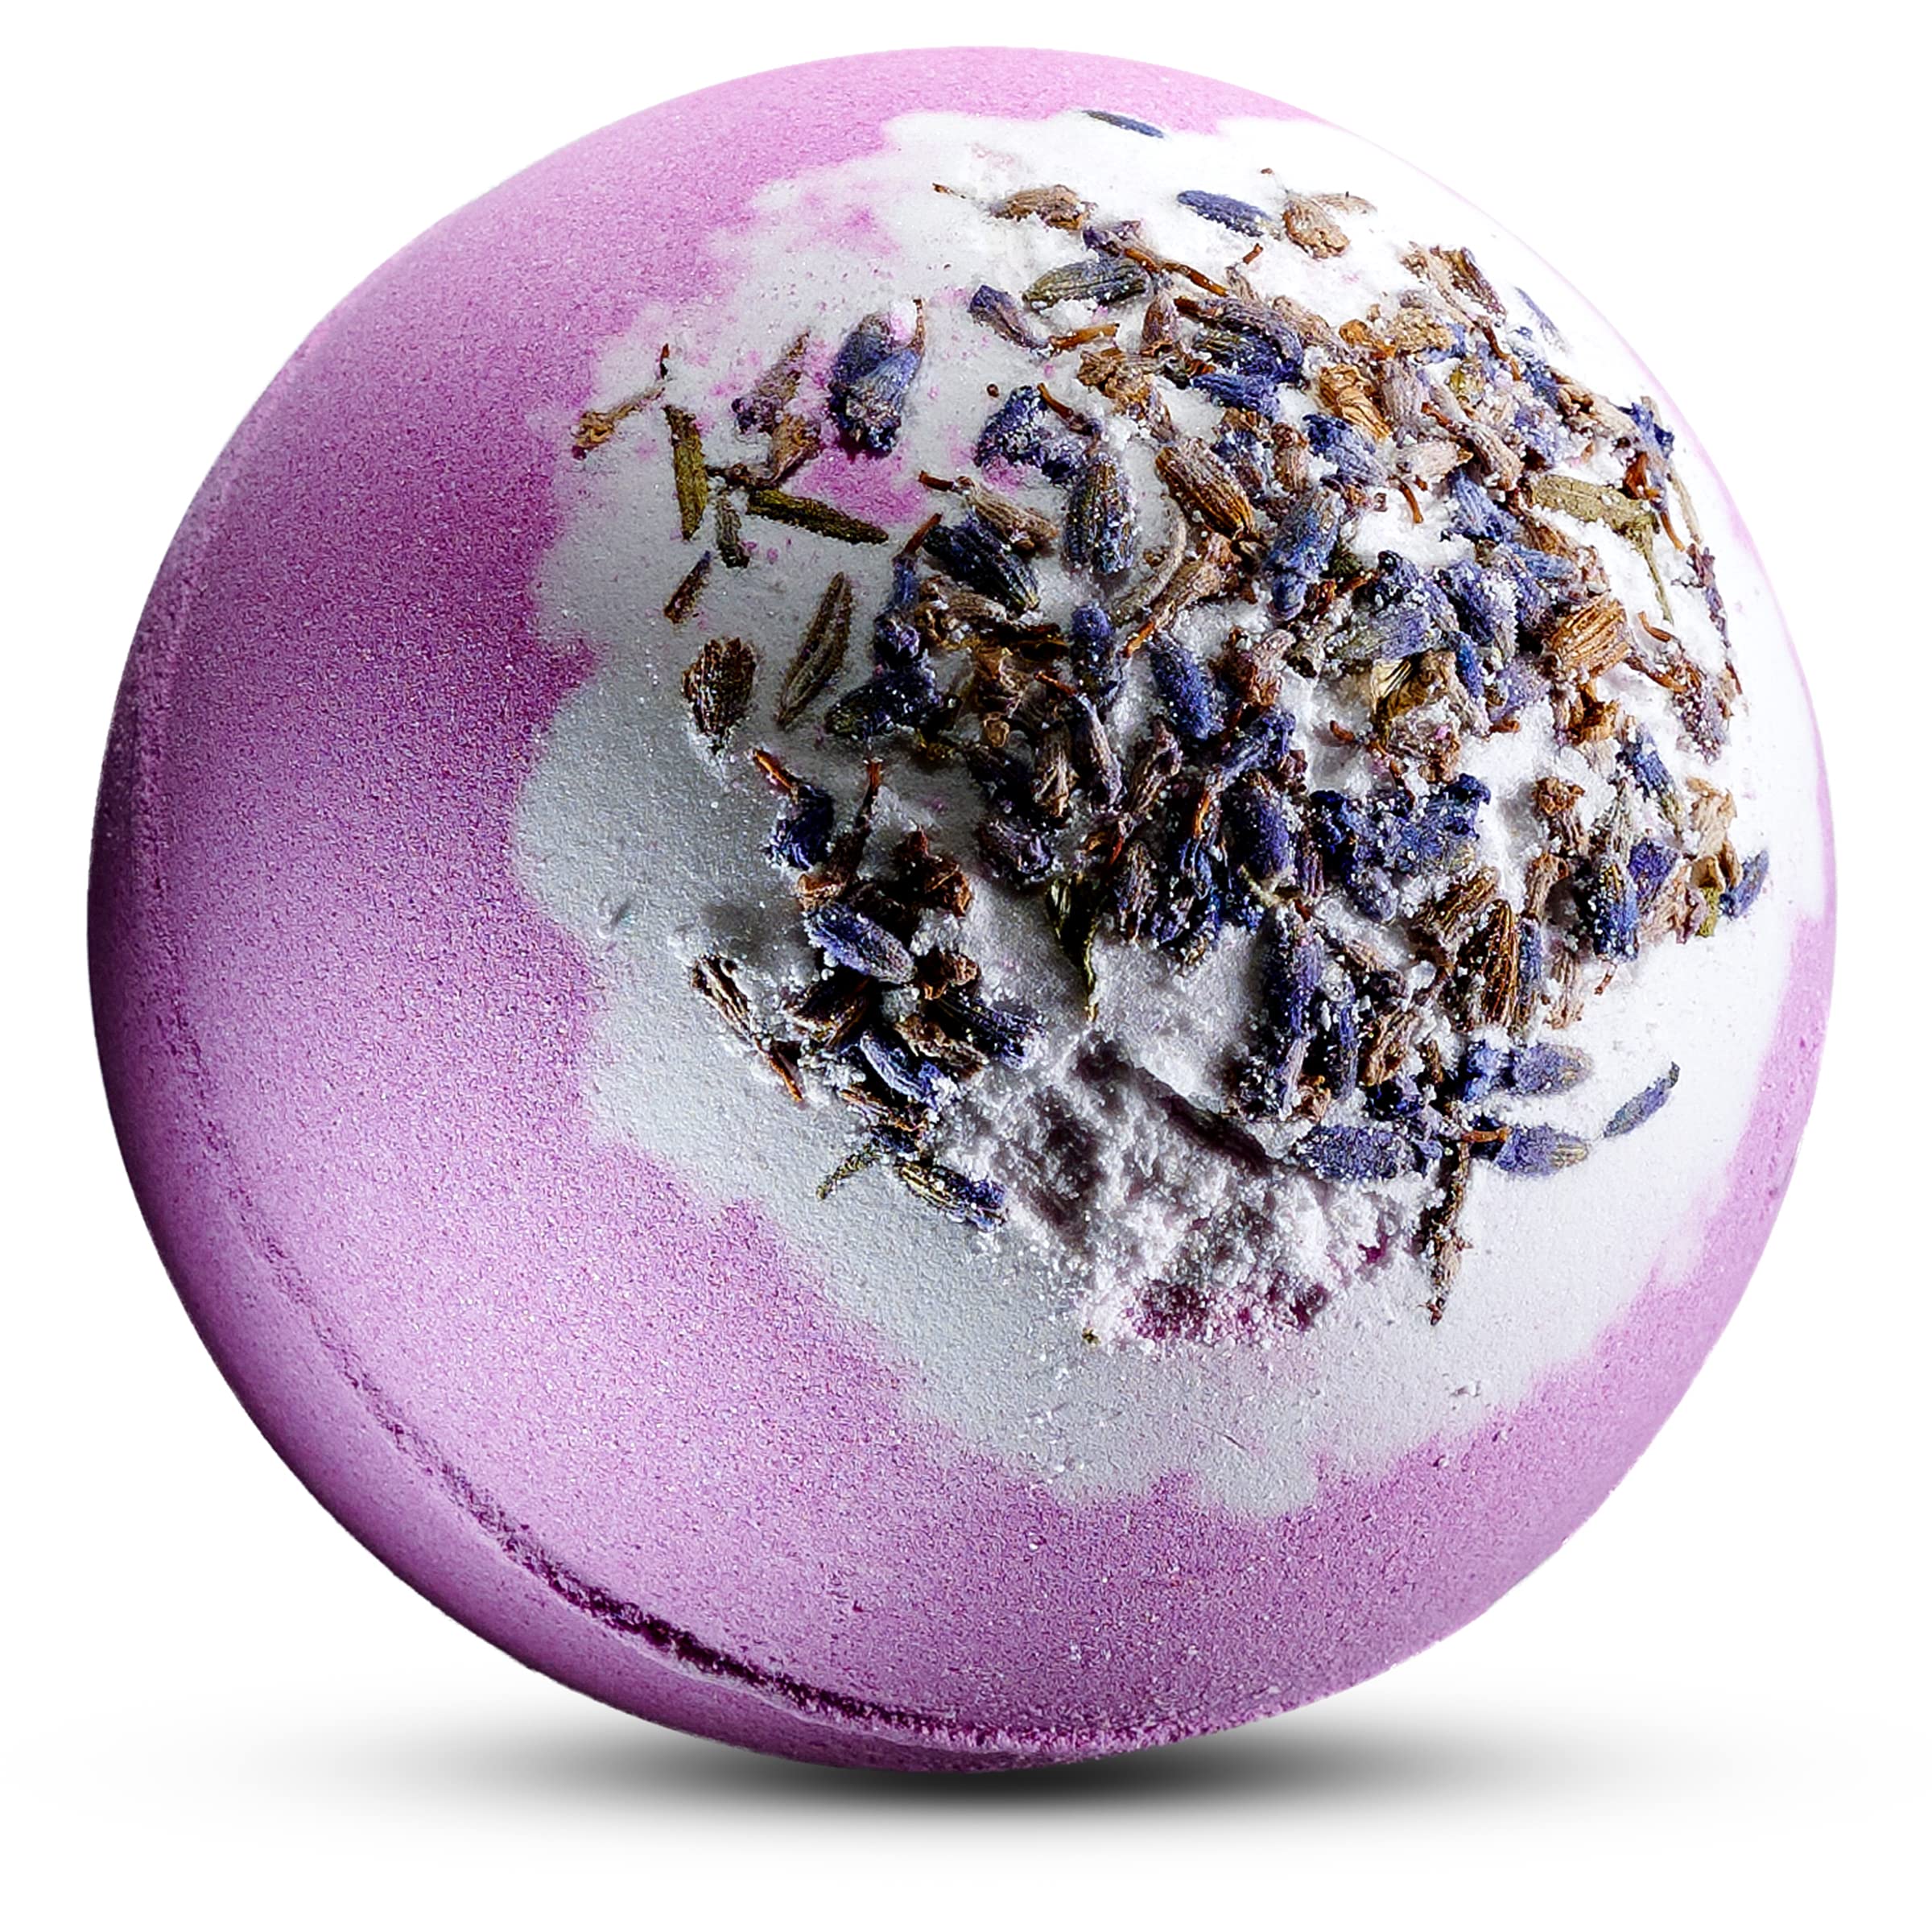 Lavender Bath Bombs for Women, Handmade Self Care Gifts for Relaxing and Relaxation Pampering Bath and Body Spa Ball, Birthday Gift Idea for Women, Men, Mom, Dad - 7oz Fizzy with Natural Lavender Oils